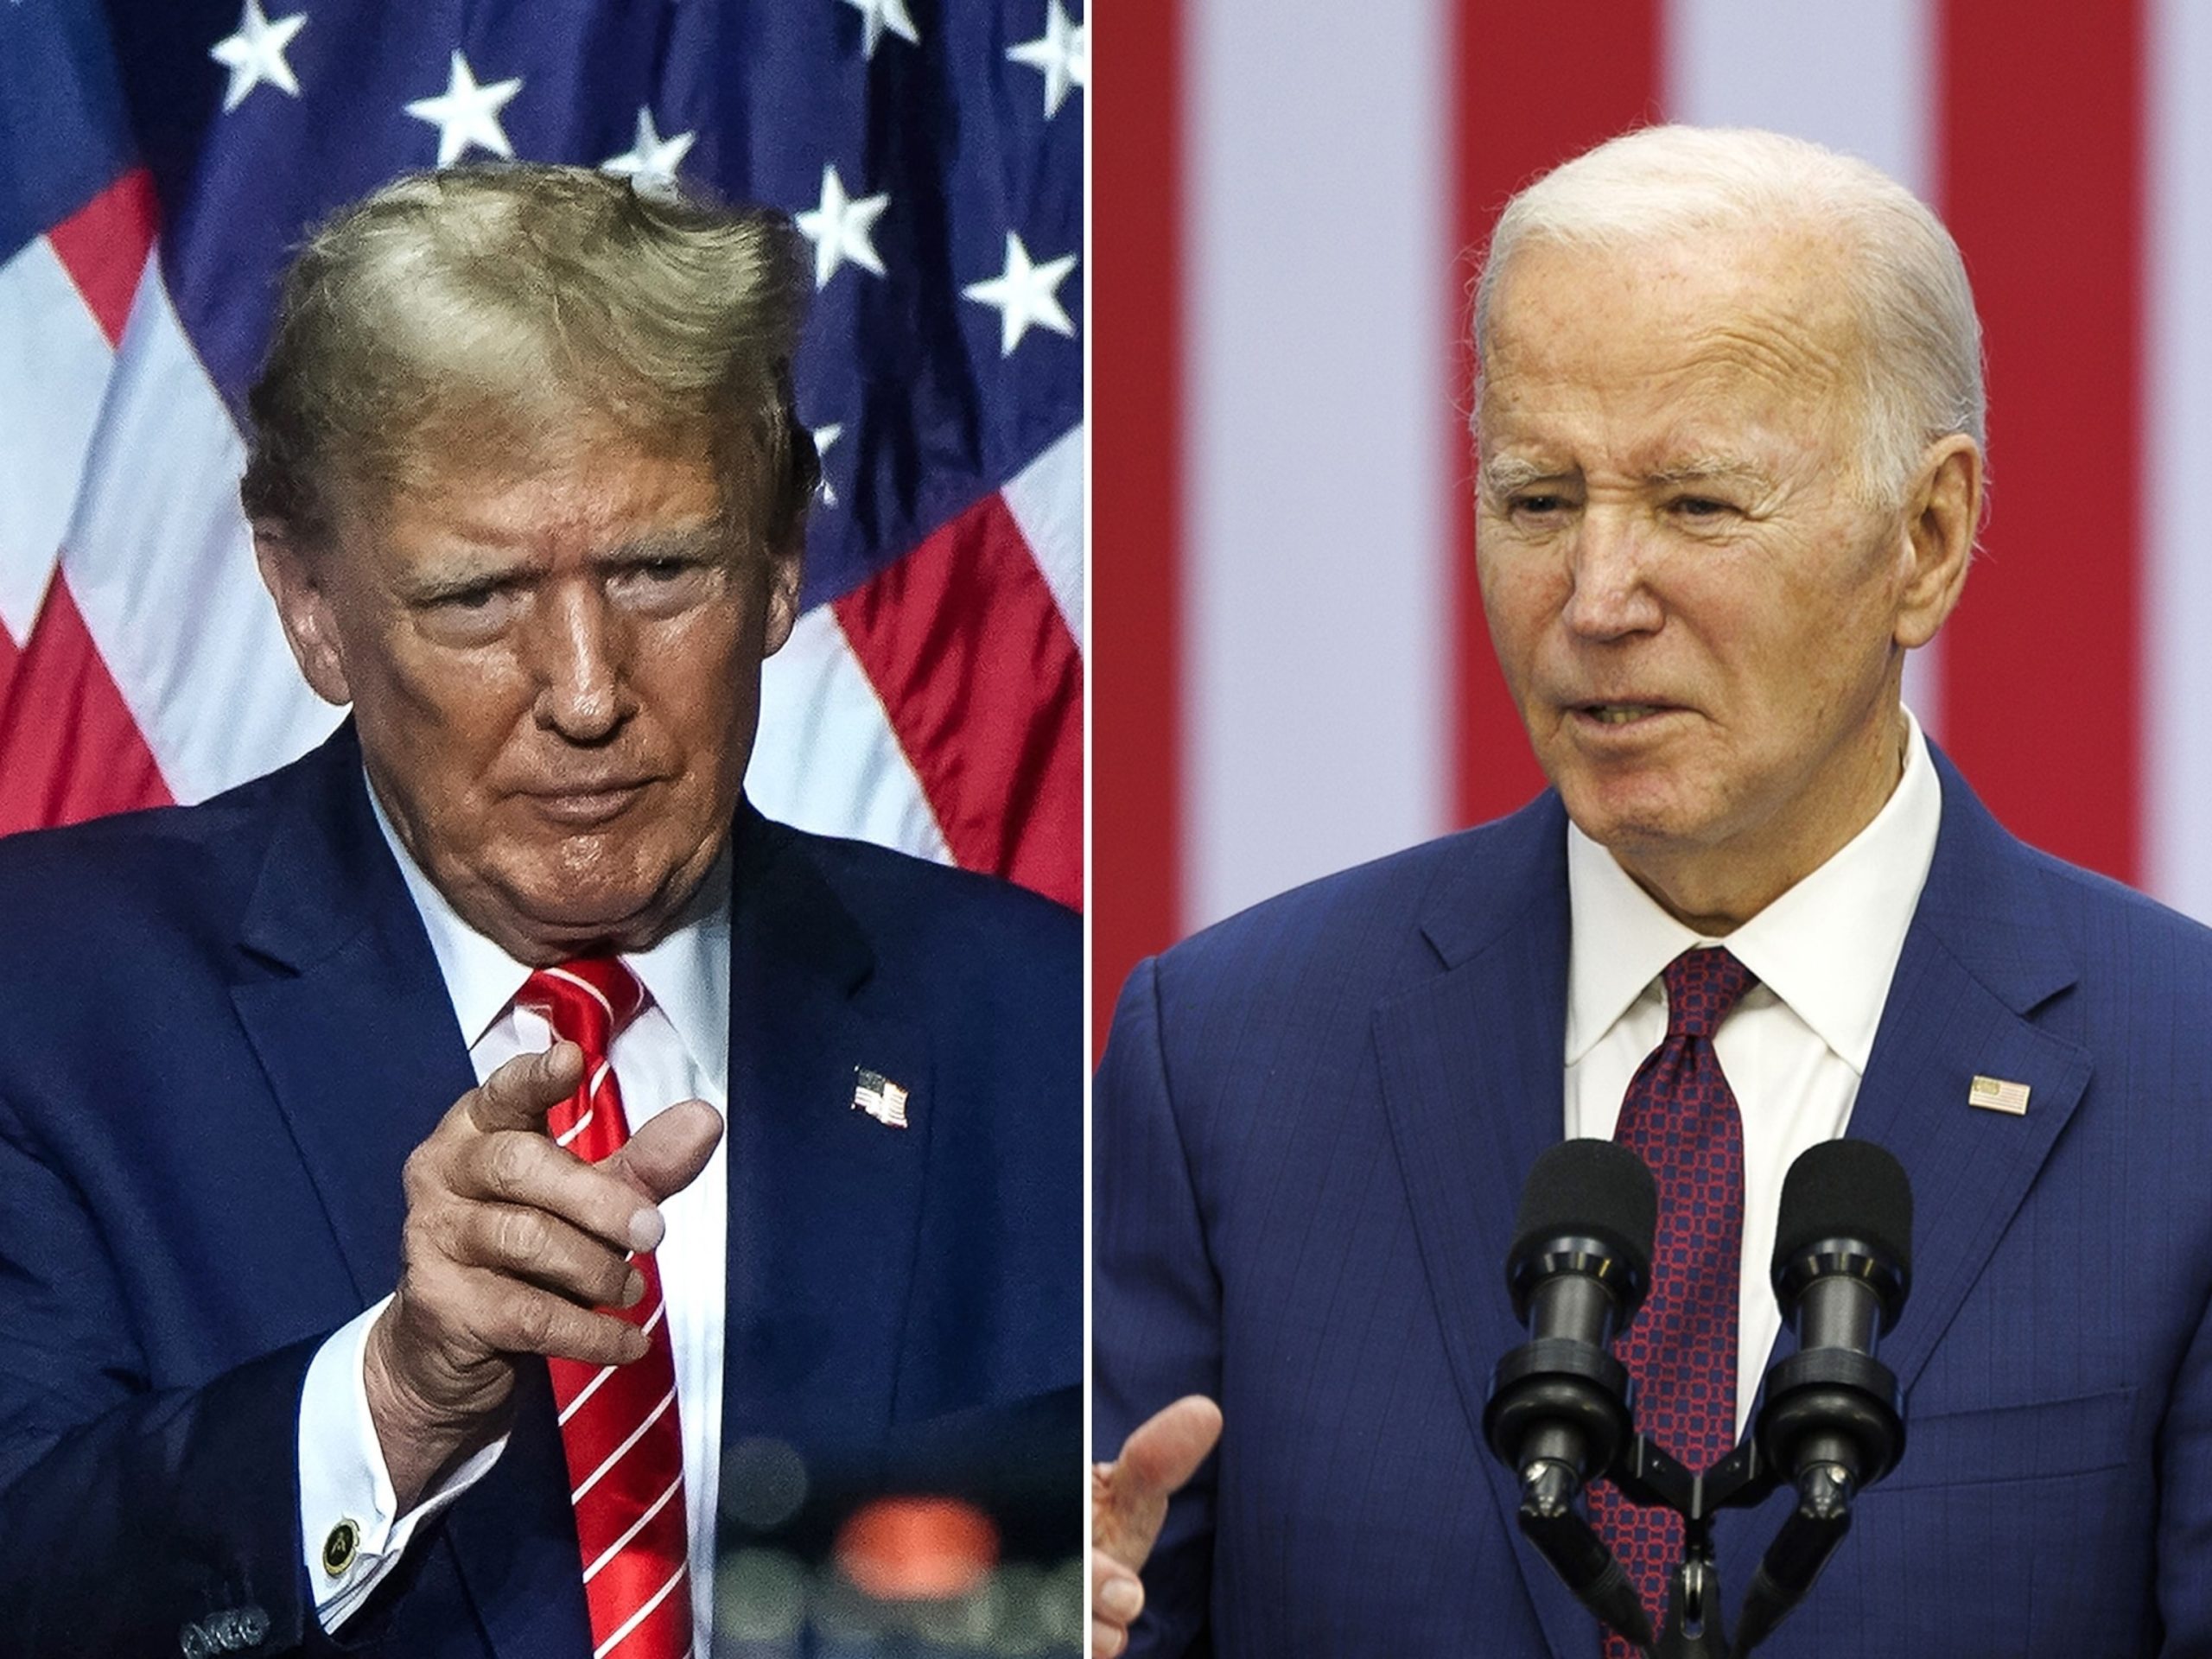 Factors that may influence the voting decisions of individuals who are critical of both Biden and Trump